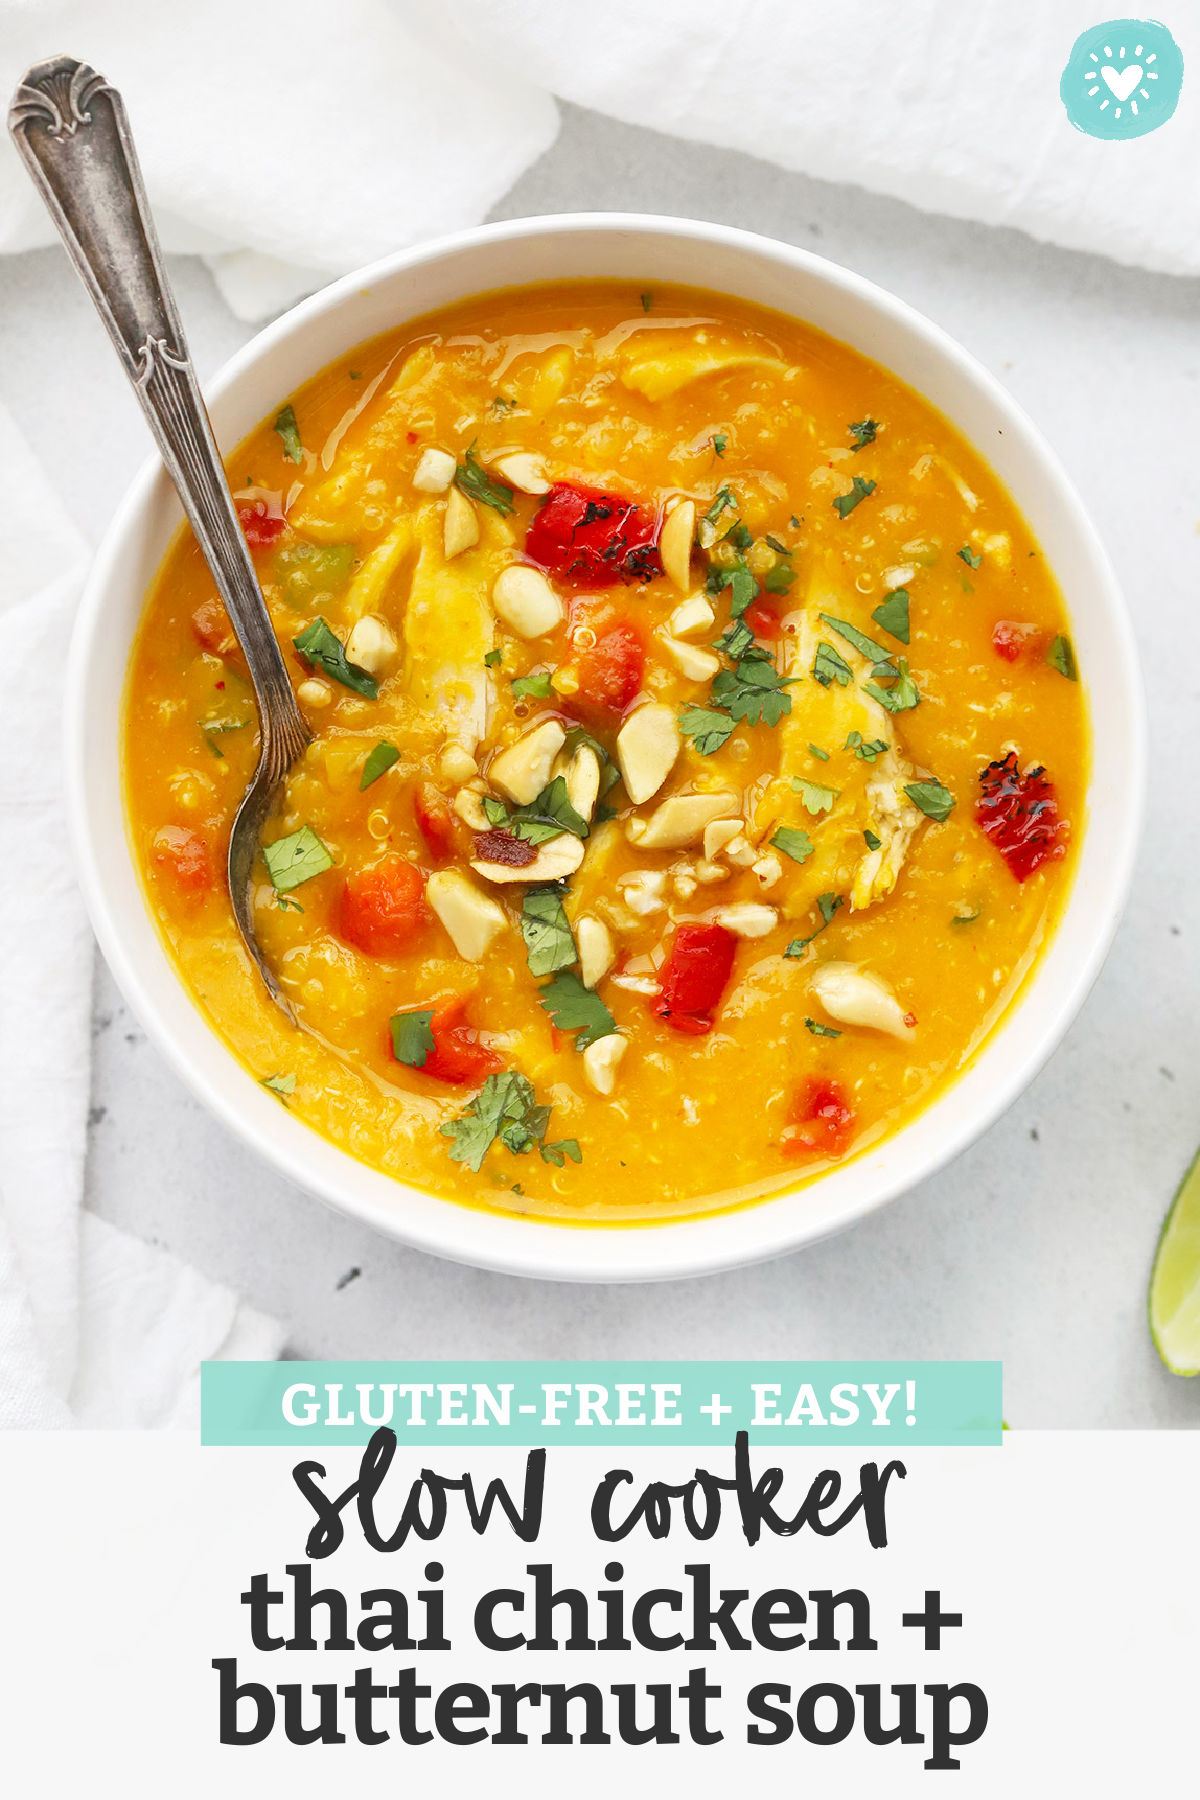 Slow Cooker Thai Chicken and Butternut Squash Soup - This curry squash soup has tender chicken, colorful veggies, and a velvety texture you'll dream about! (Gluten-Free, Dairy-Free) // Thai Curry Squash Quinoa Soup // Squash Chicken Soup #slowcooker #soup #squash #chicken #cleaneating #healthydinner #healthylunch